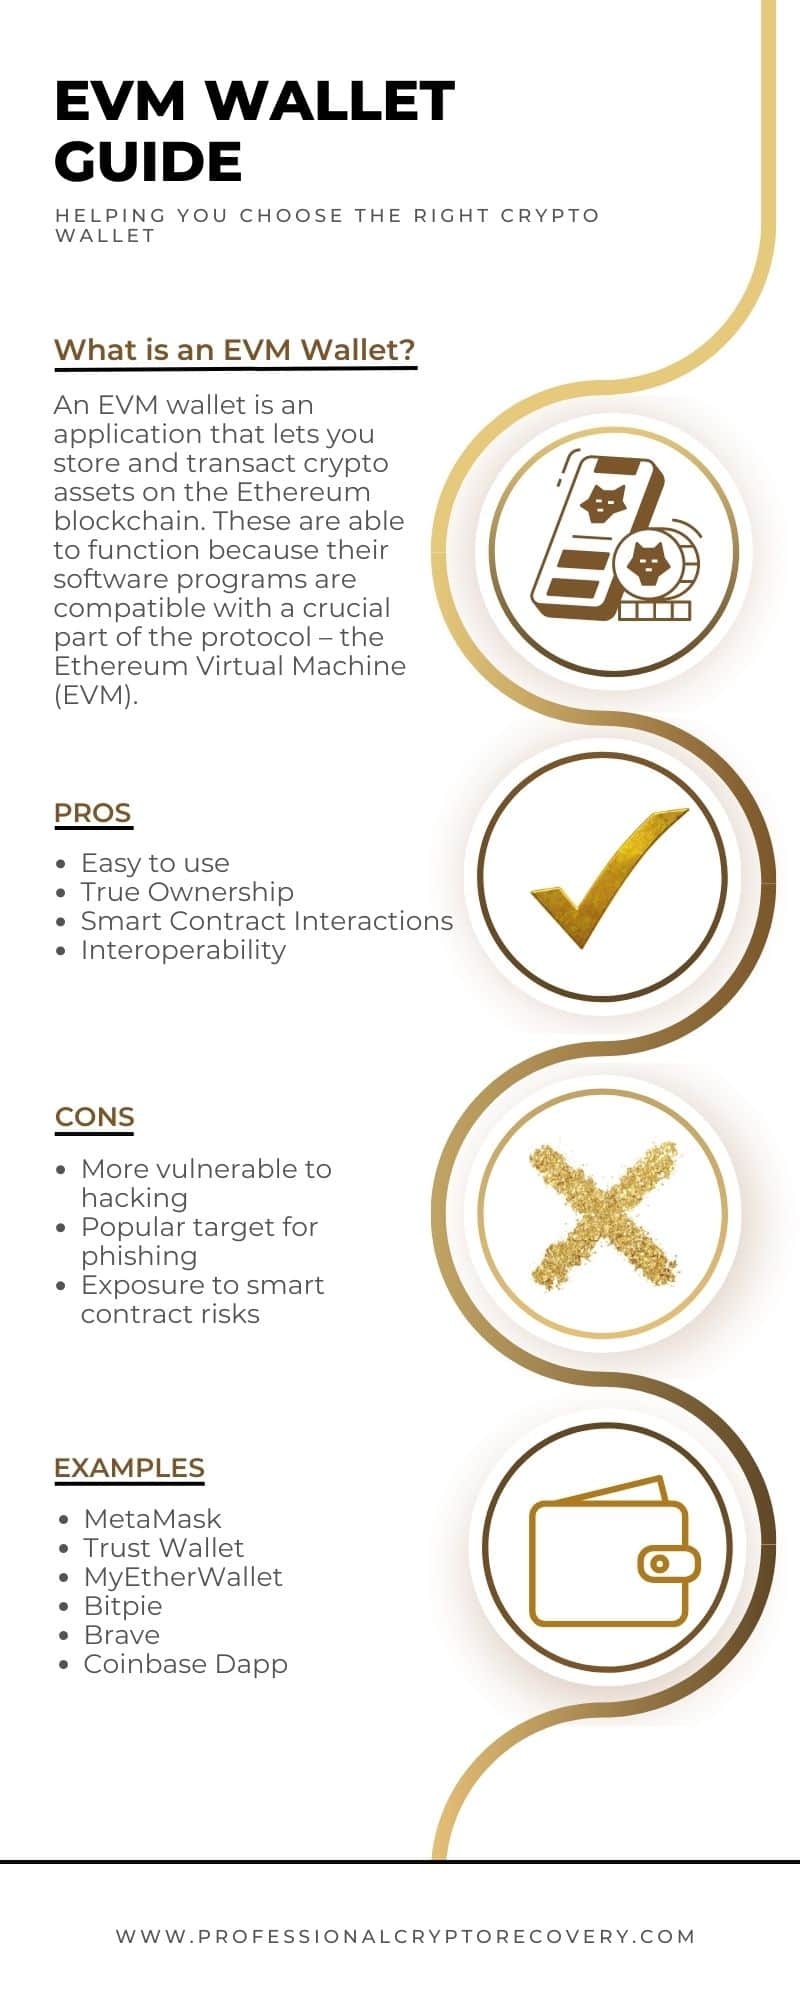 EVM Wallet Guide Infographic